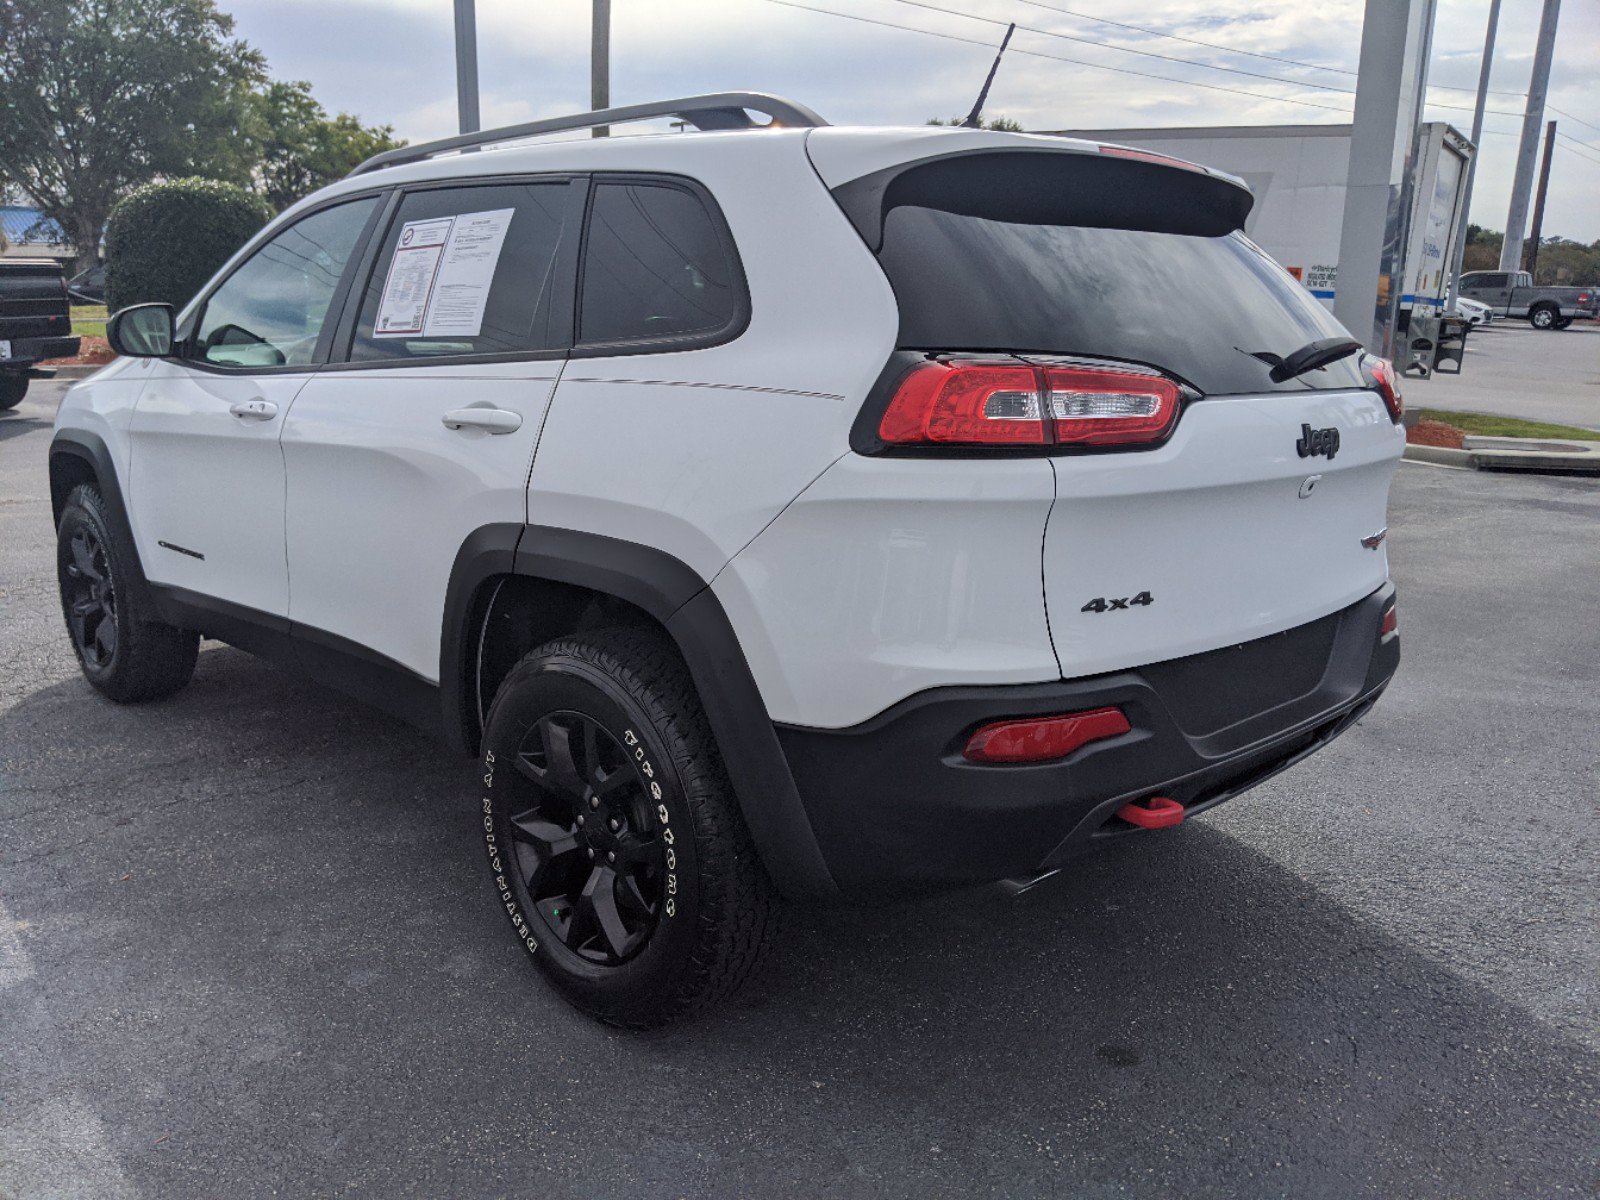 PreOwned 2014 Jeep Cherokee Trailhawk Sport Utility in